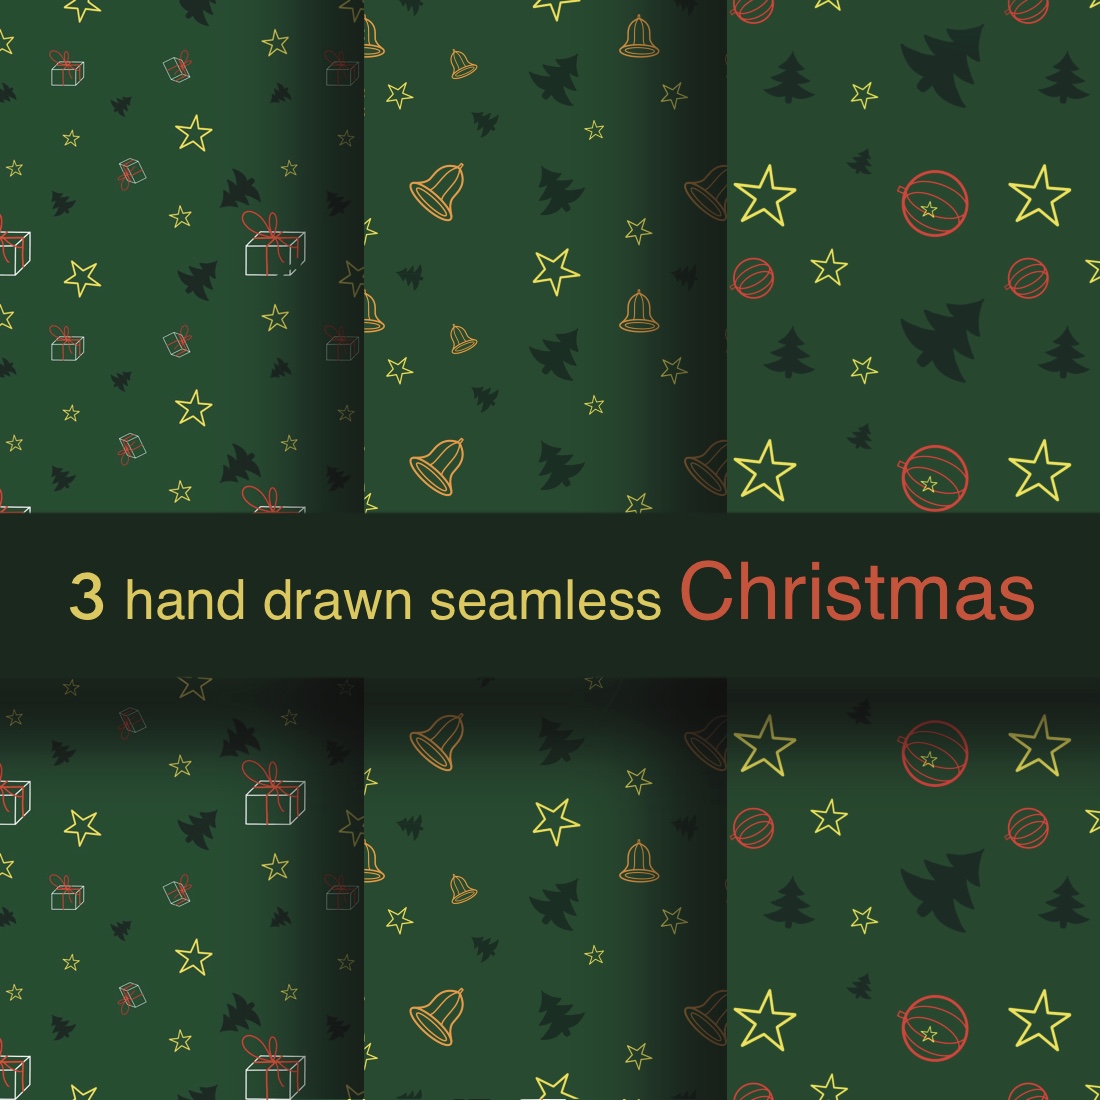 3 hand made seamless patterns Marry Christmas cover image.